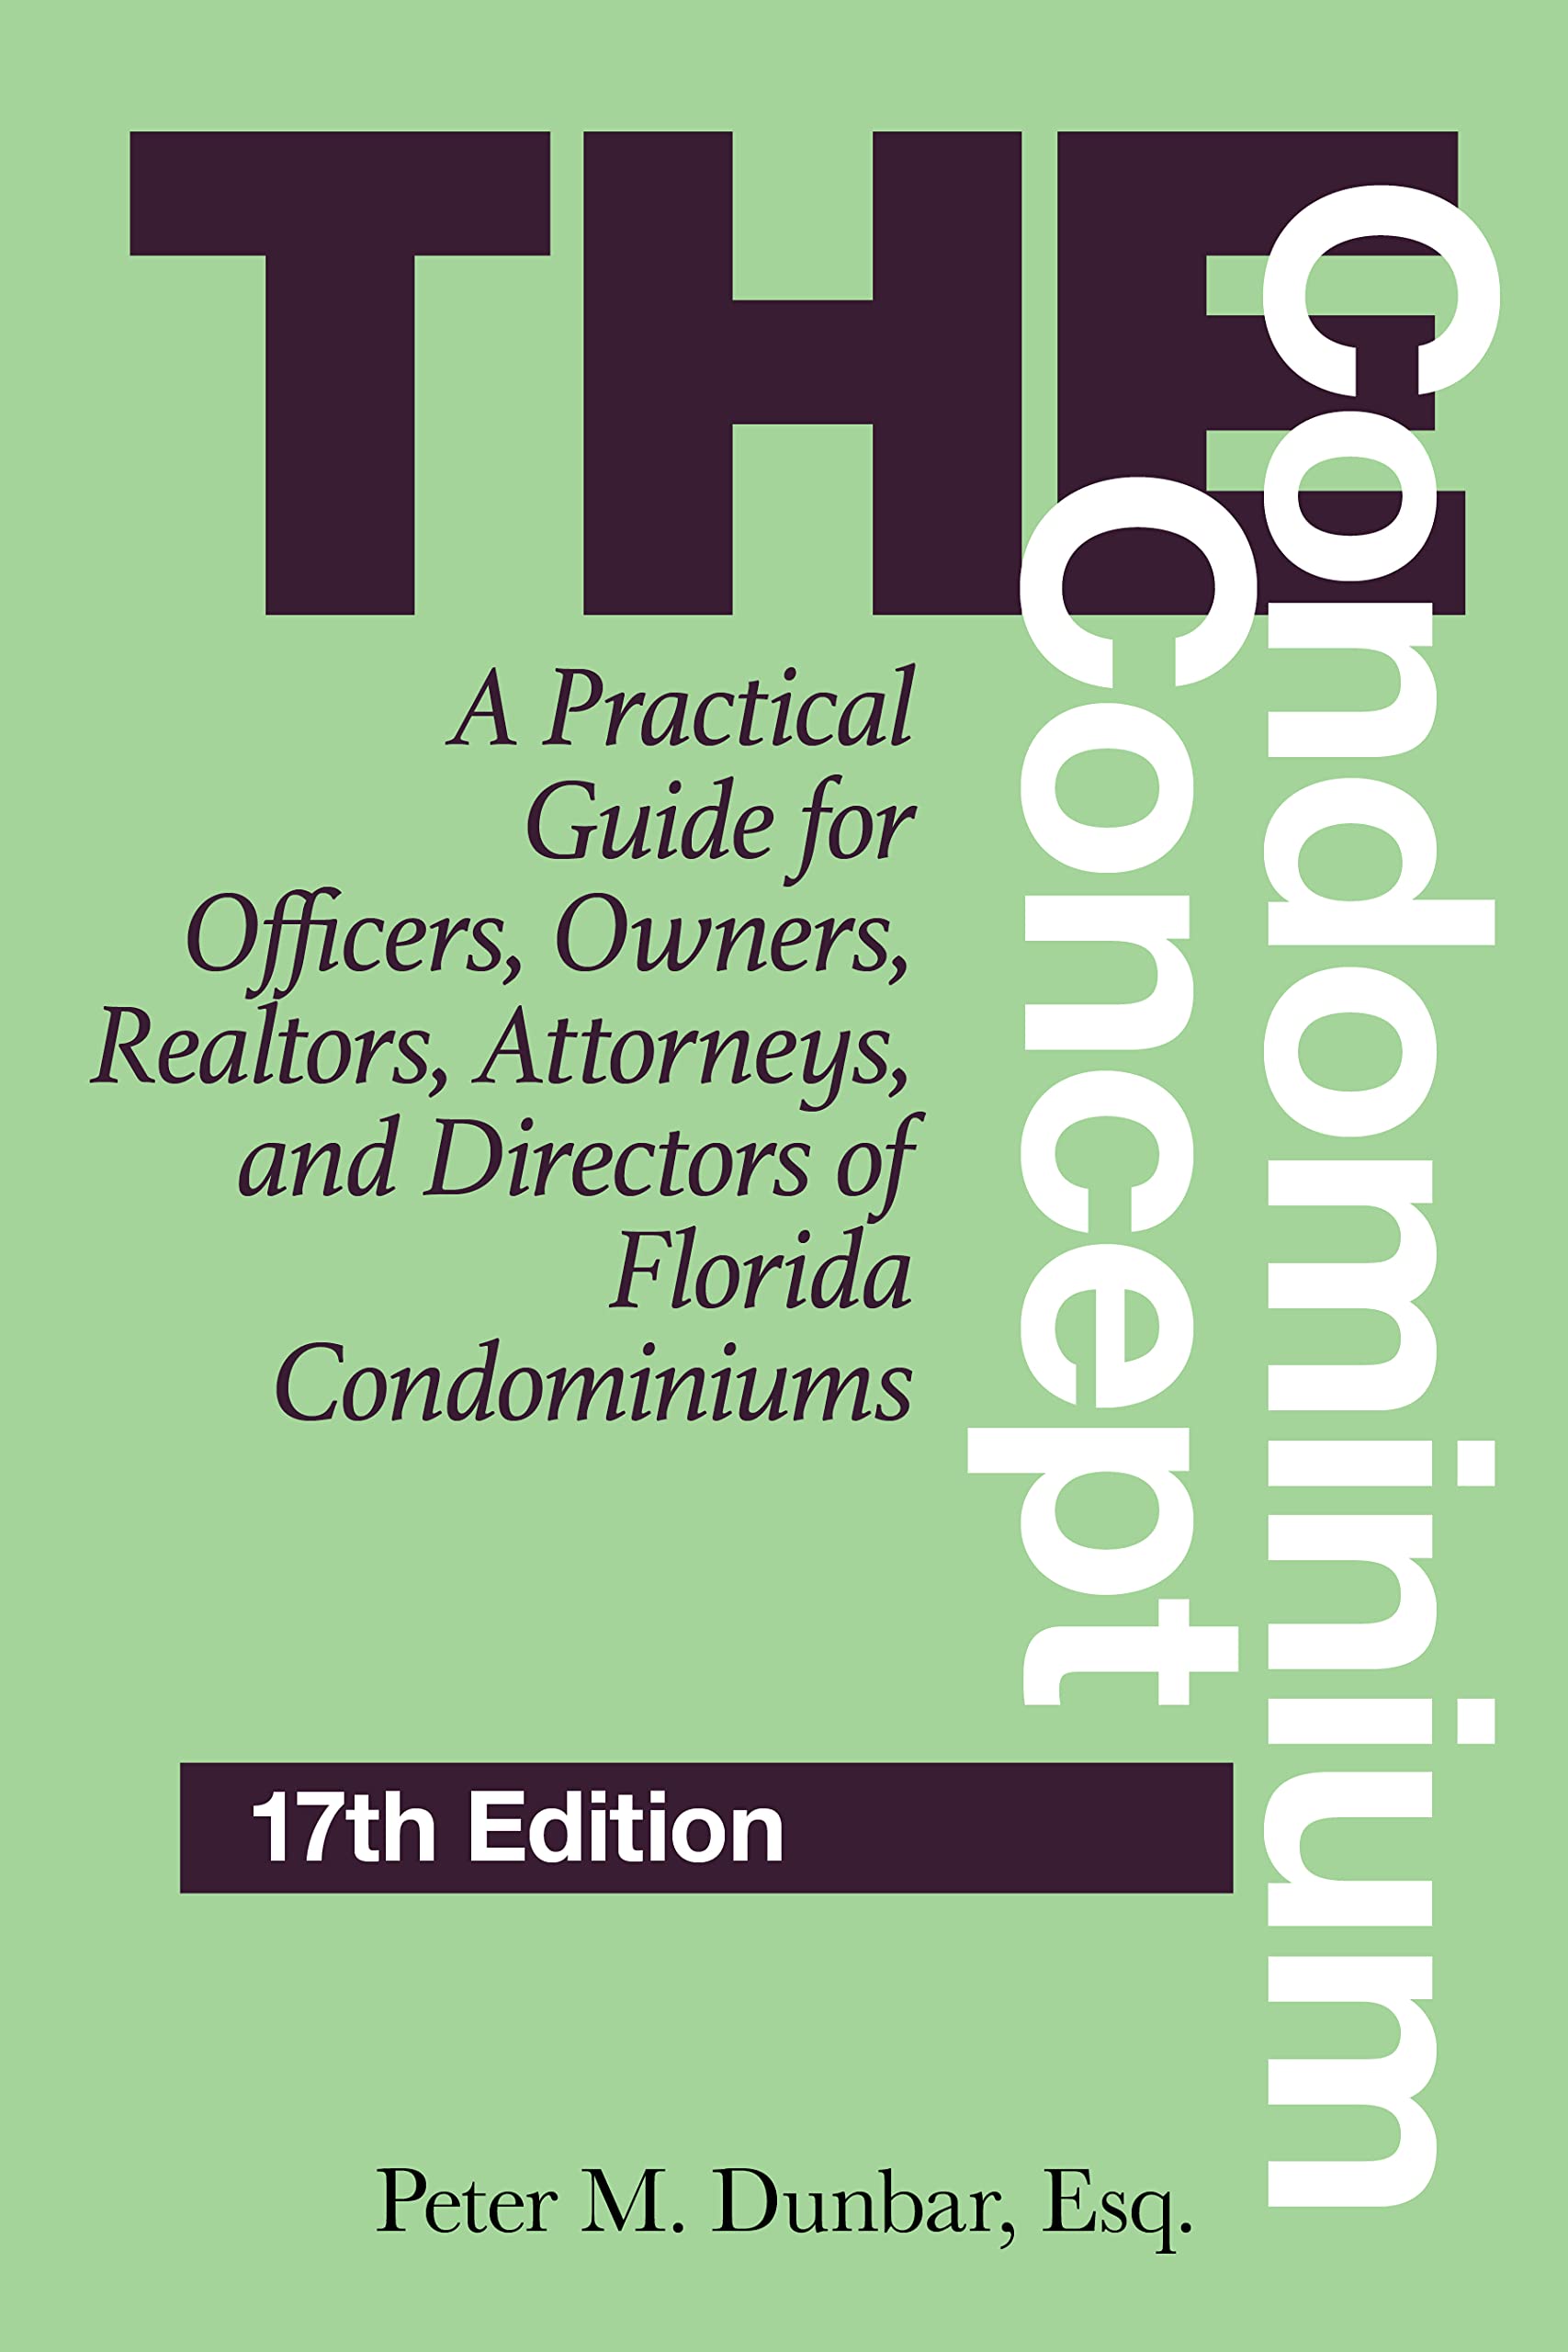 The Condominium Concept: A Practical Guide for Officers, Owners, Realtors, Attorneys, and Directors of Florida Condominiums (Condominium Concepts)